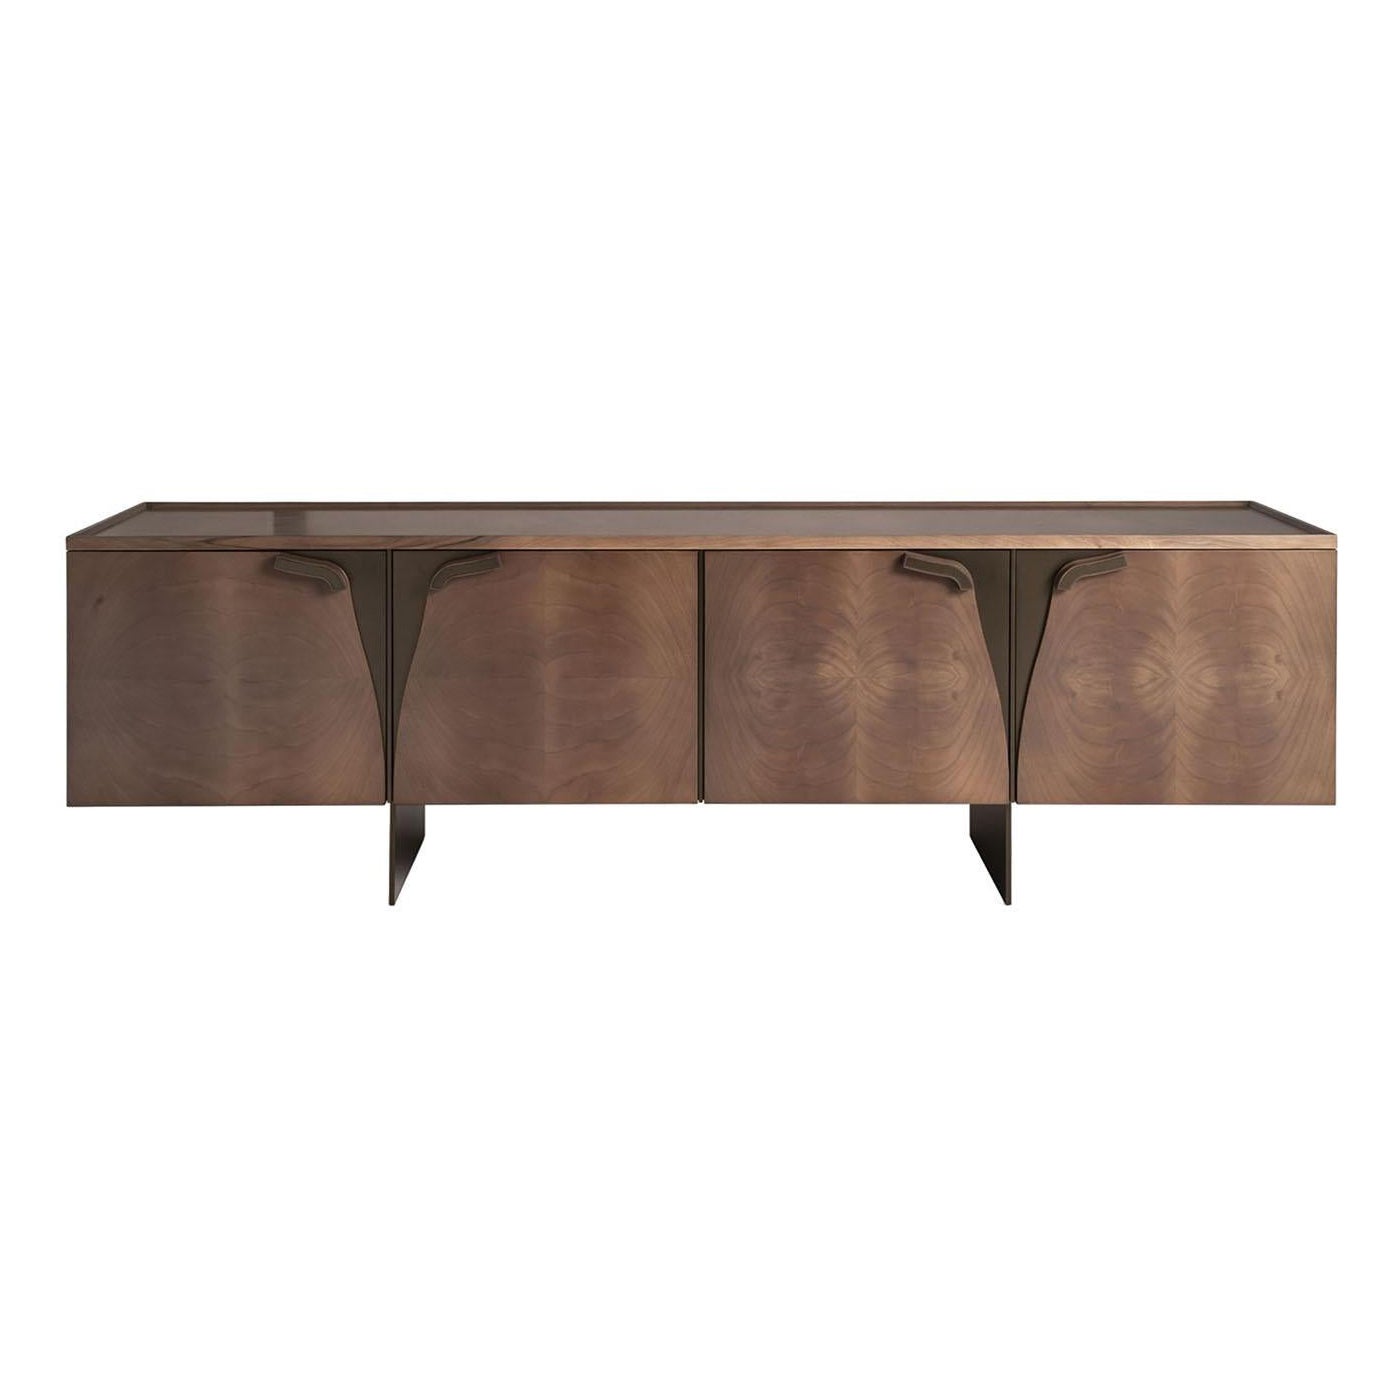 ED/20 321 Romance Sideboard For Sale